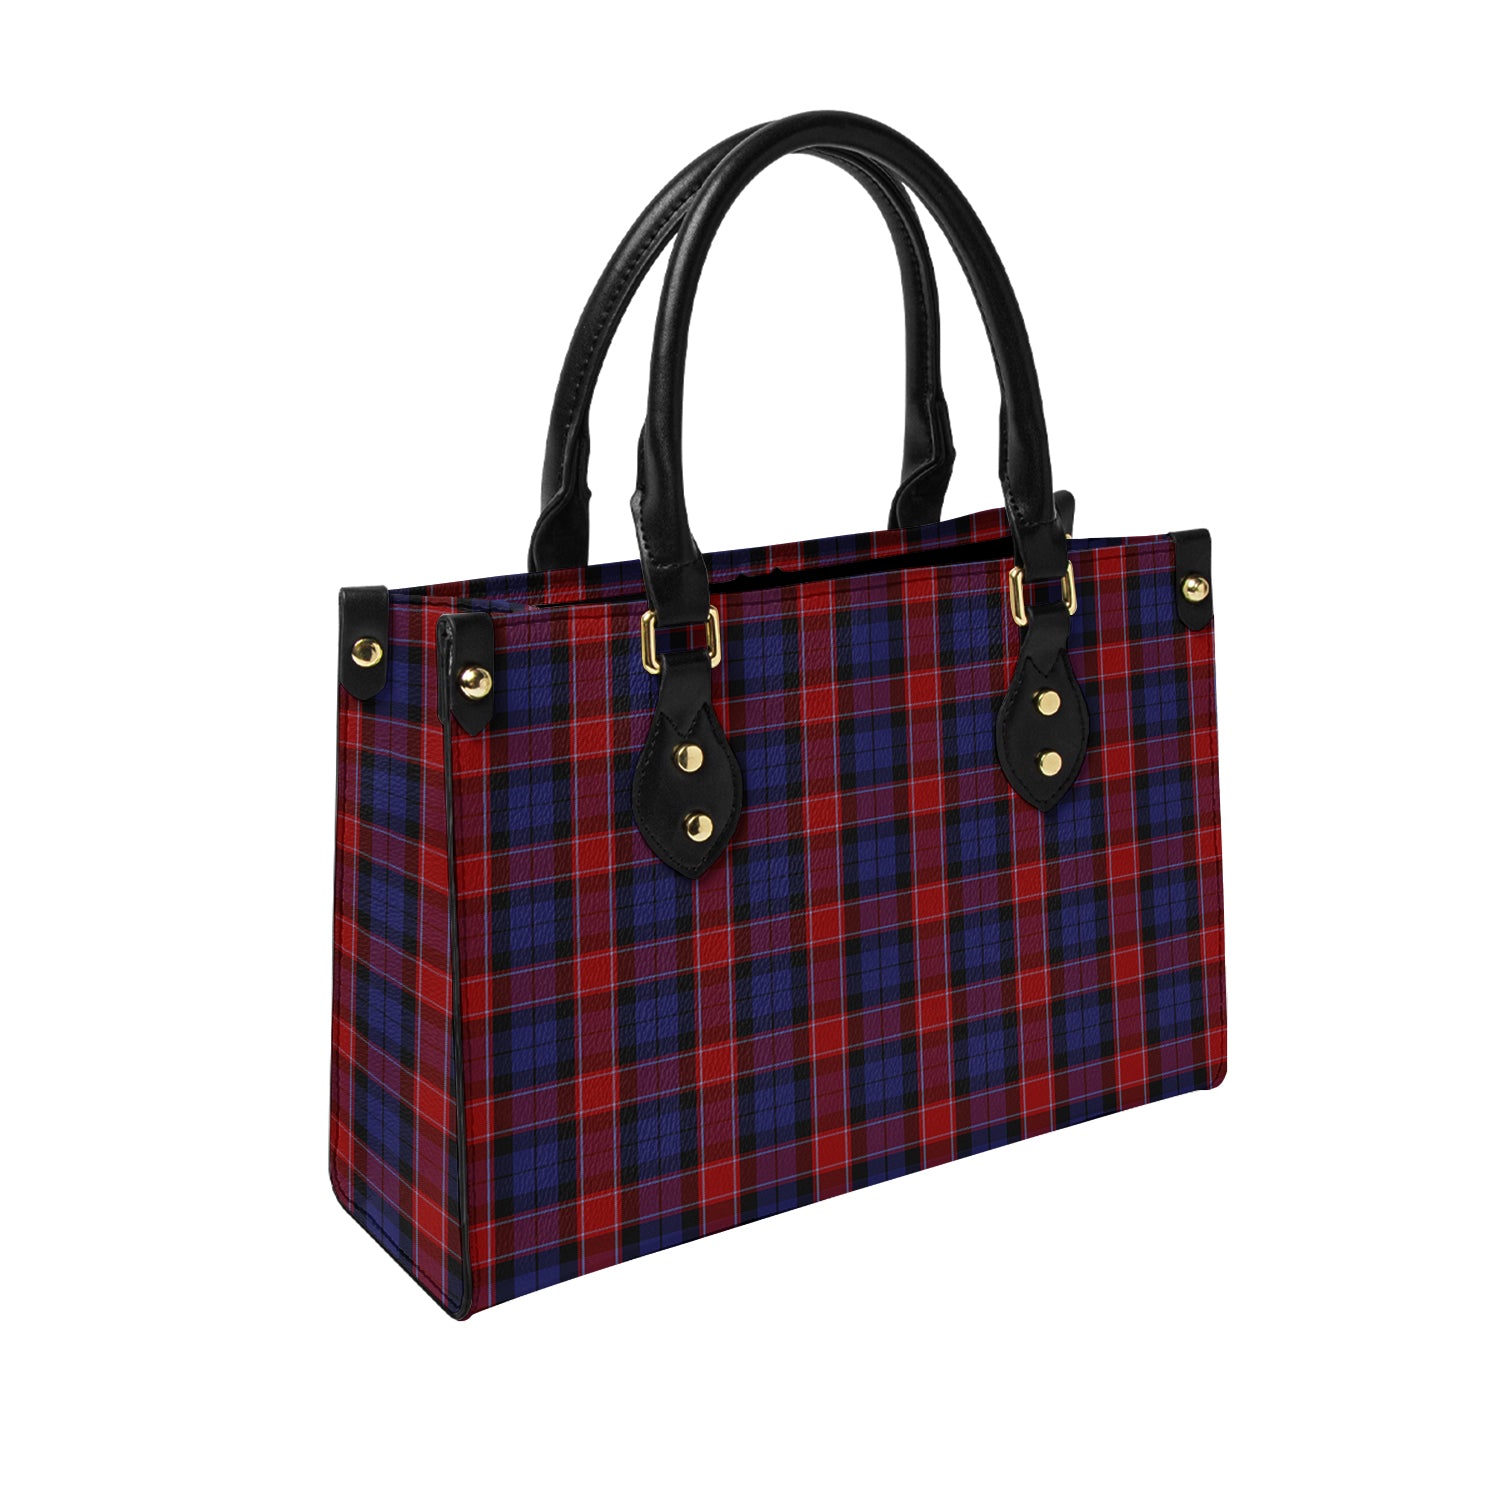 graham-of-menteith-red-tartan-leather-bag